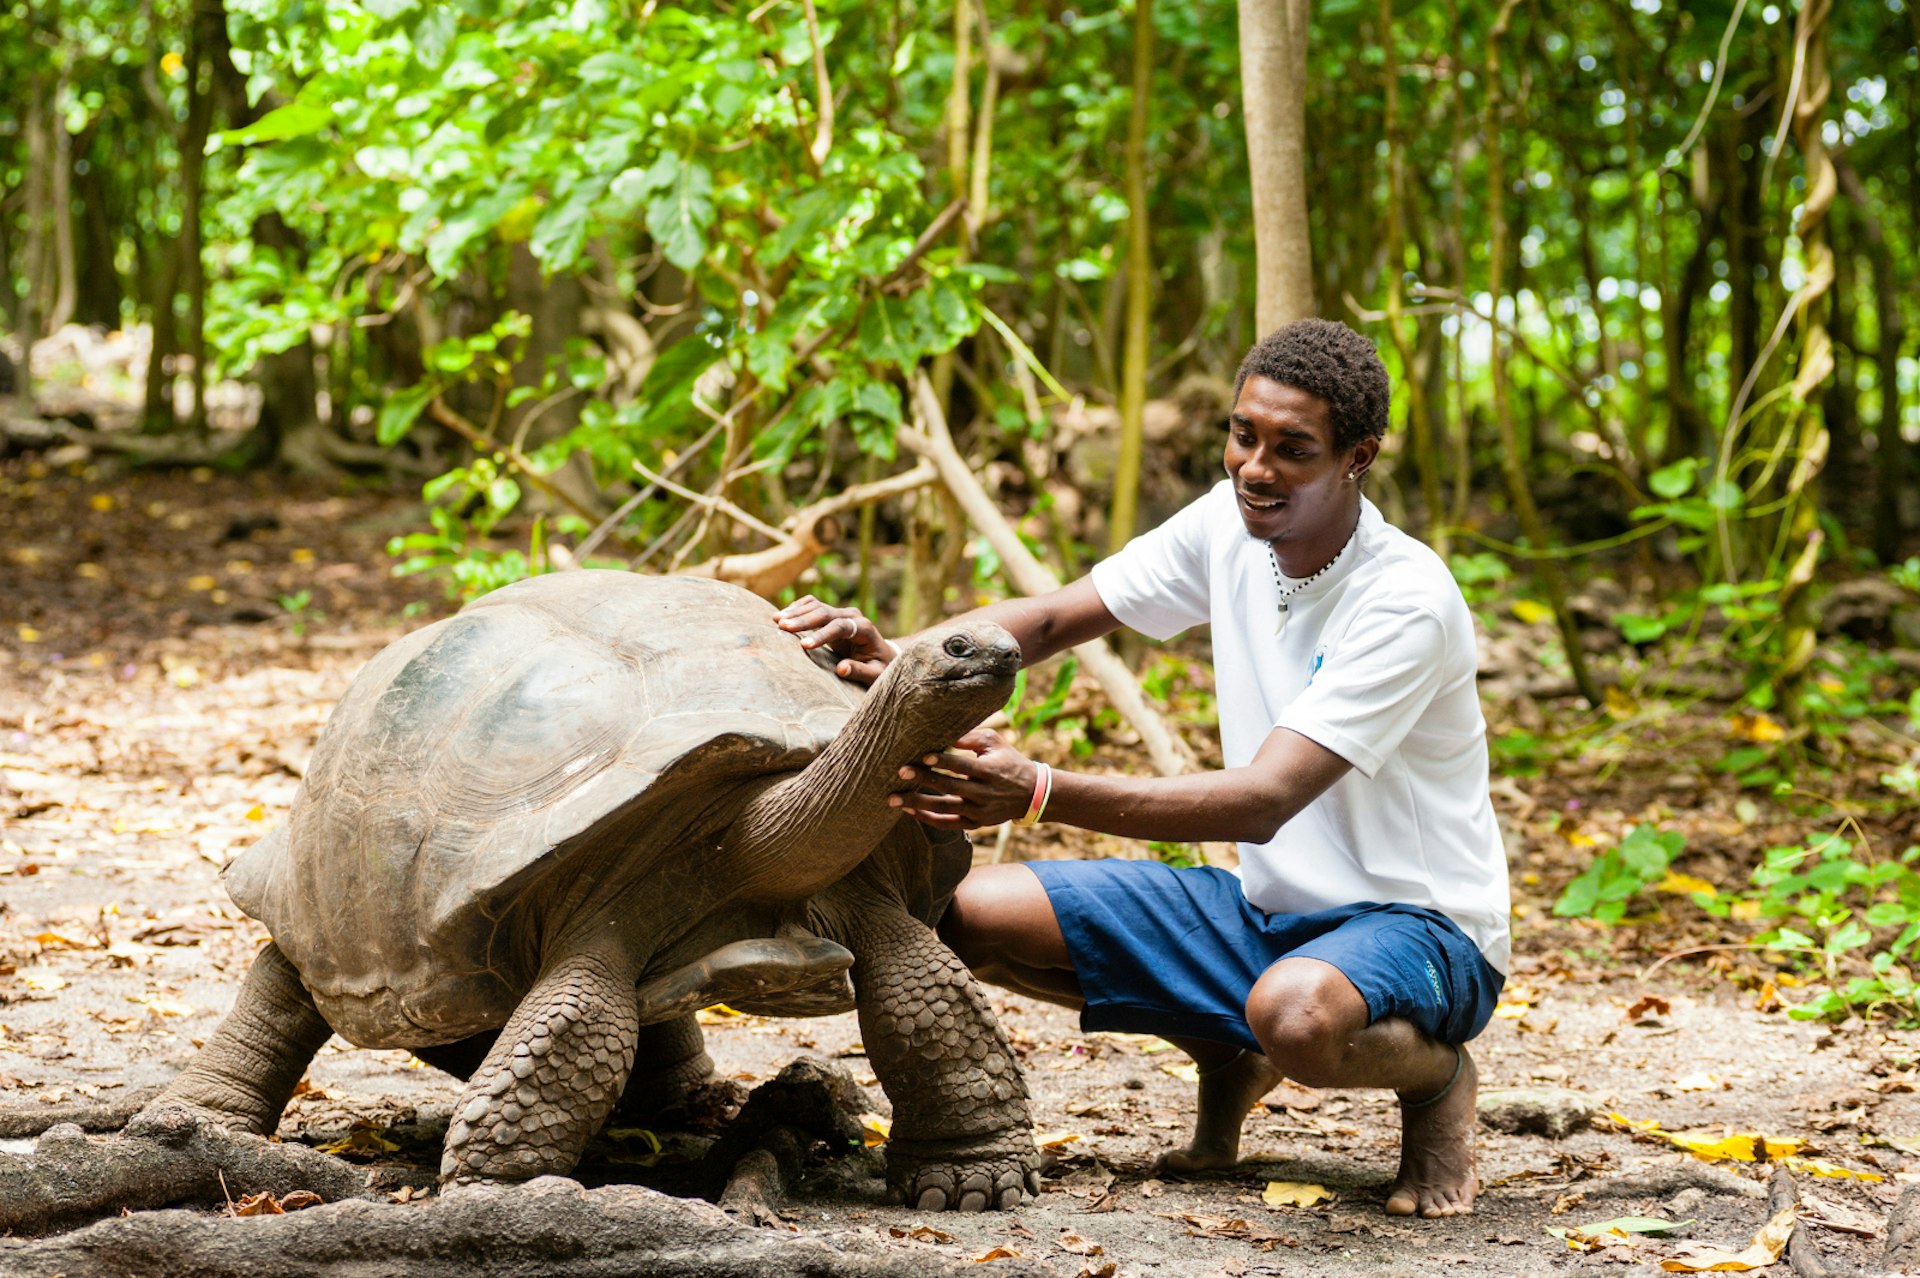 George, one of the oldest giant tortoises, stands and lifts his head as a local guide crouches beside him in the forest and strokes his long neck © Justin Foulkes/Lonely Planet 